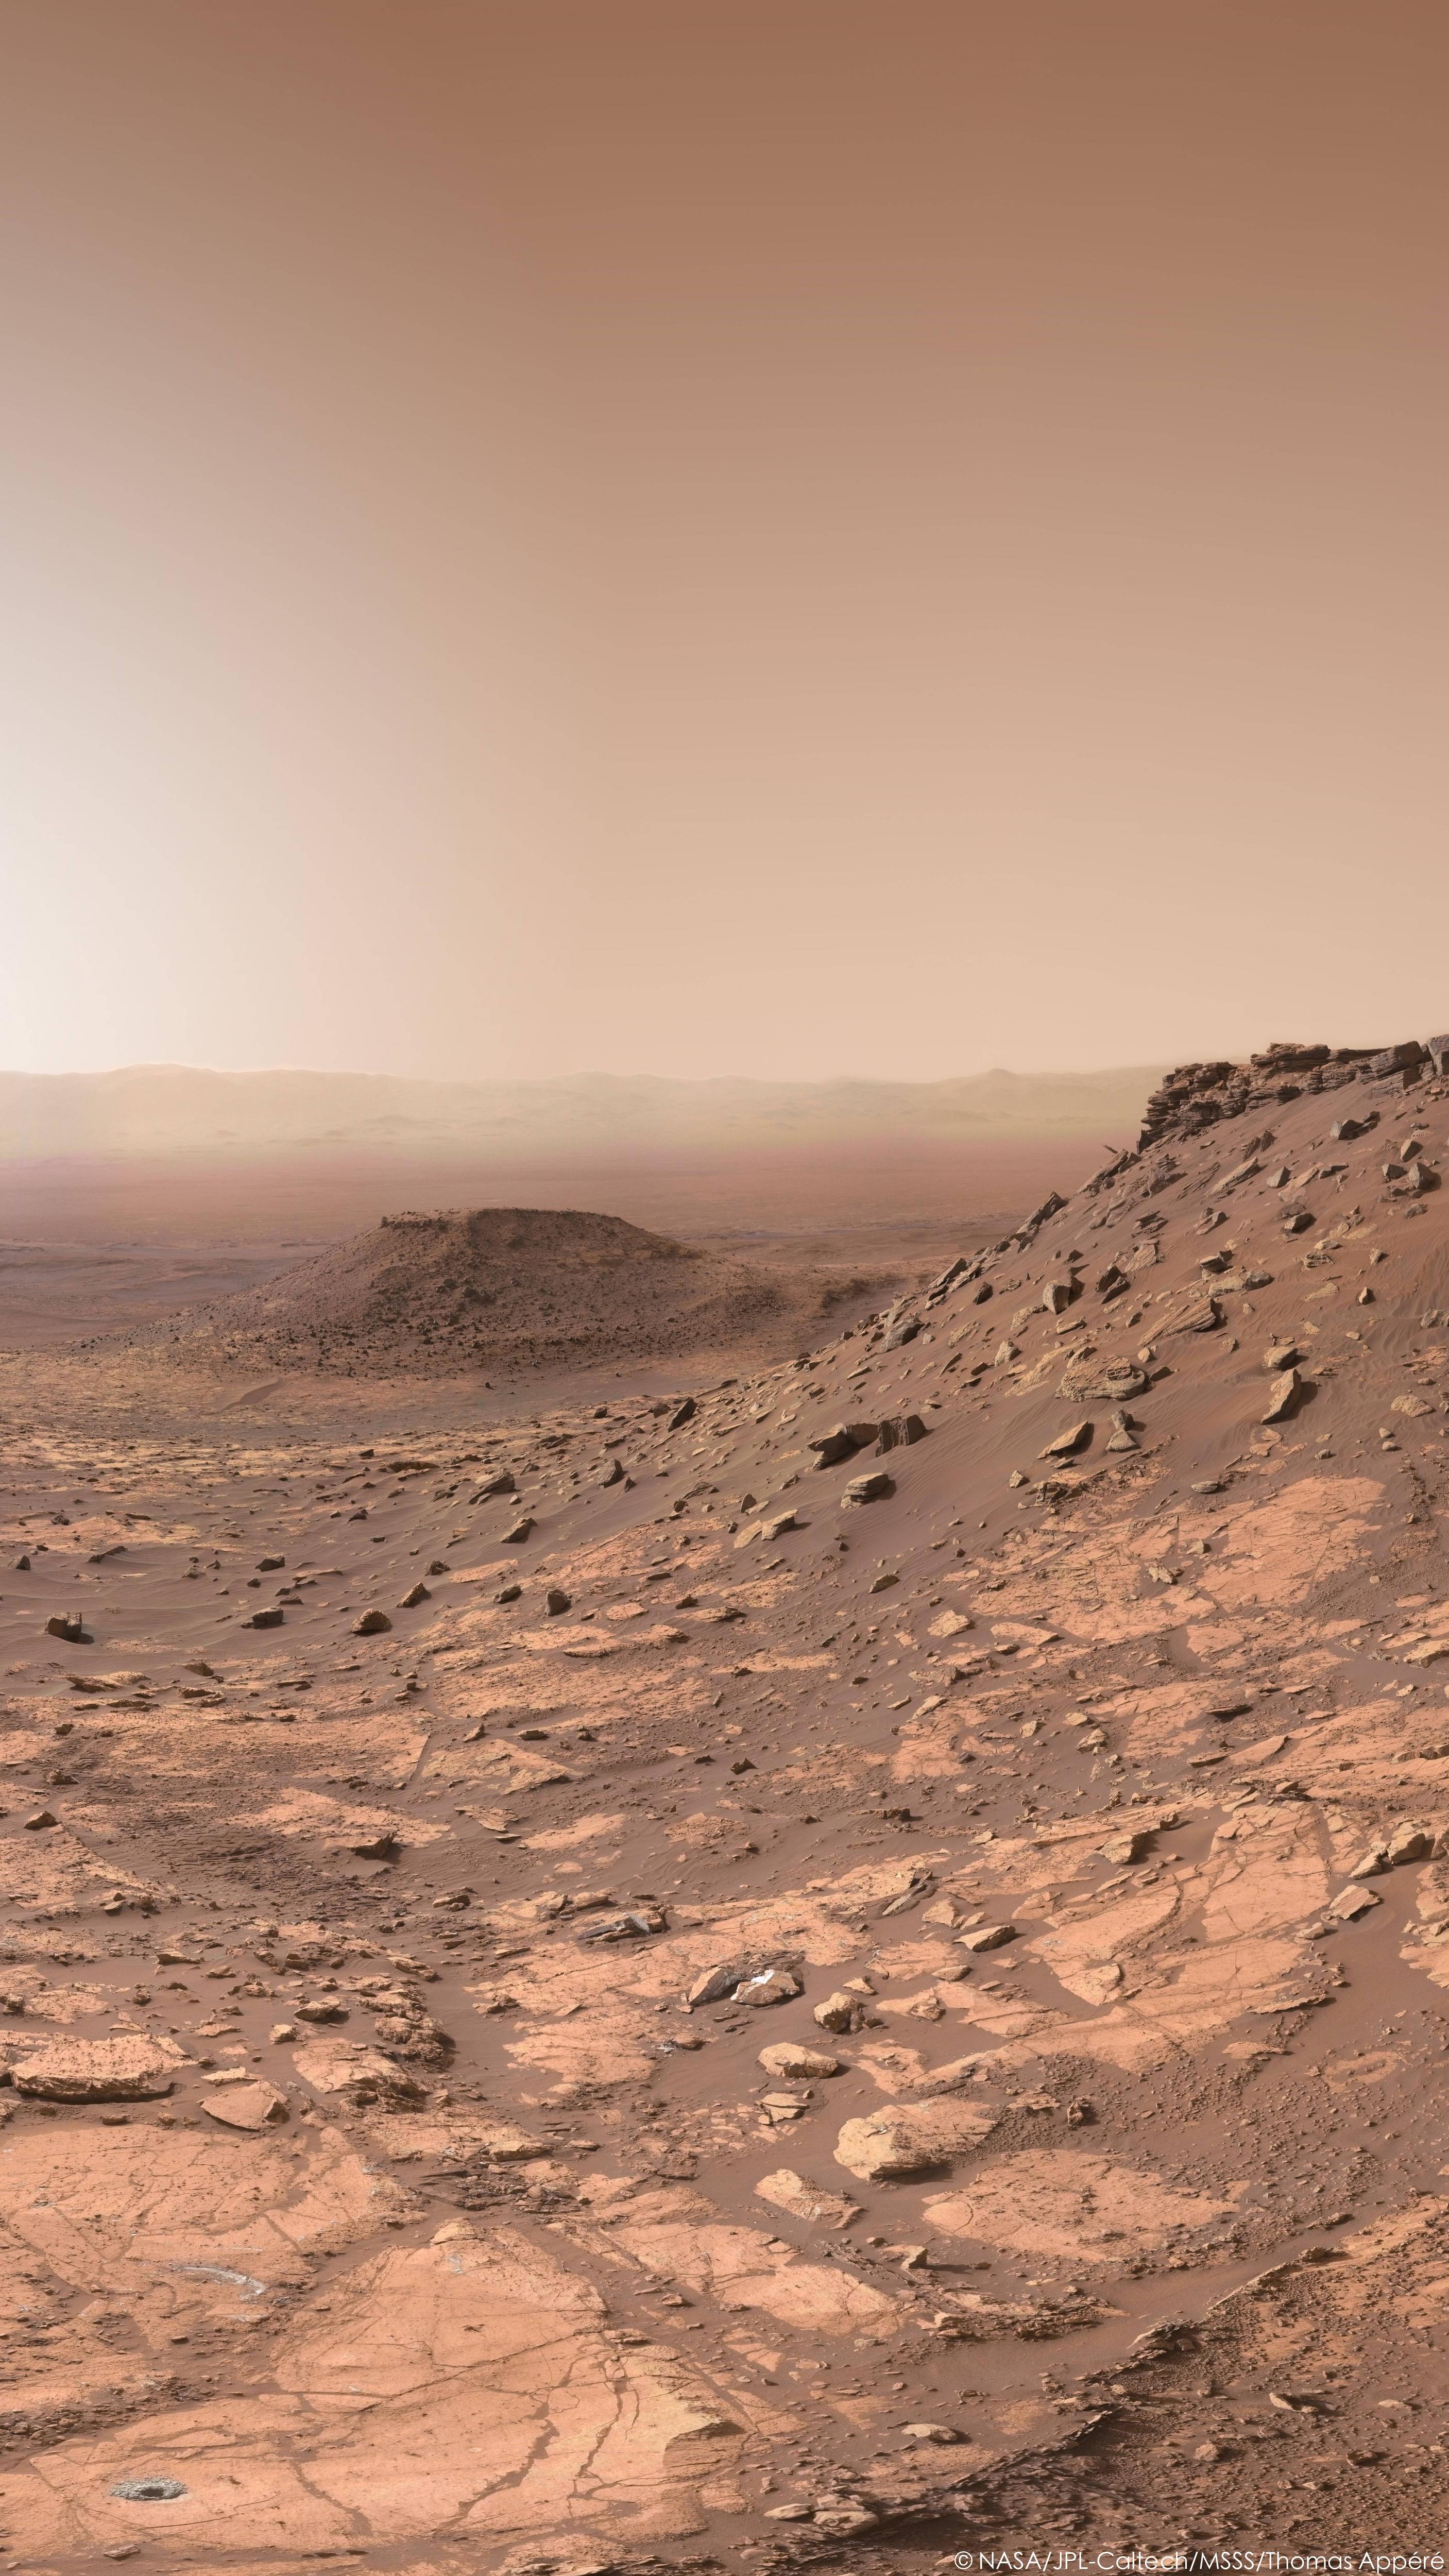 The view on Mars